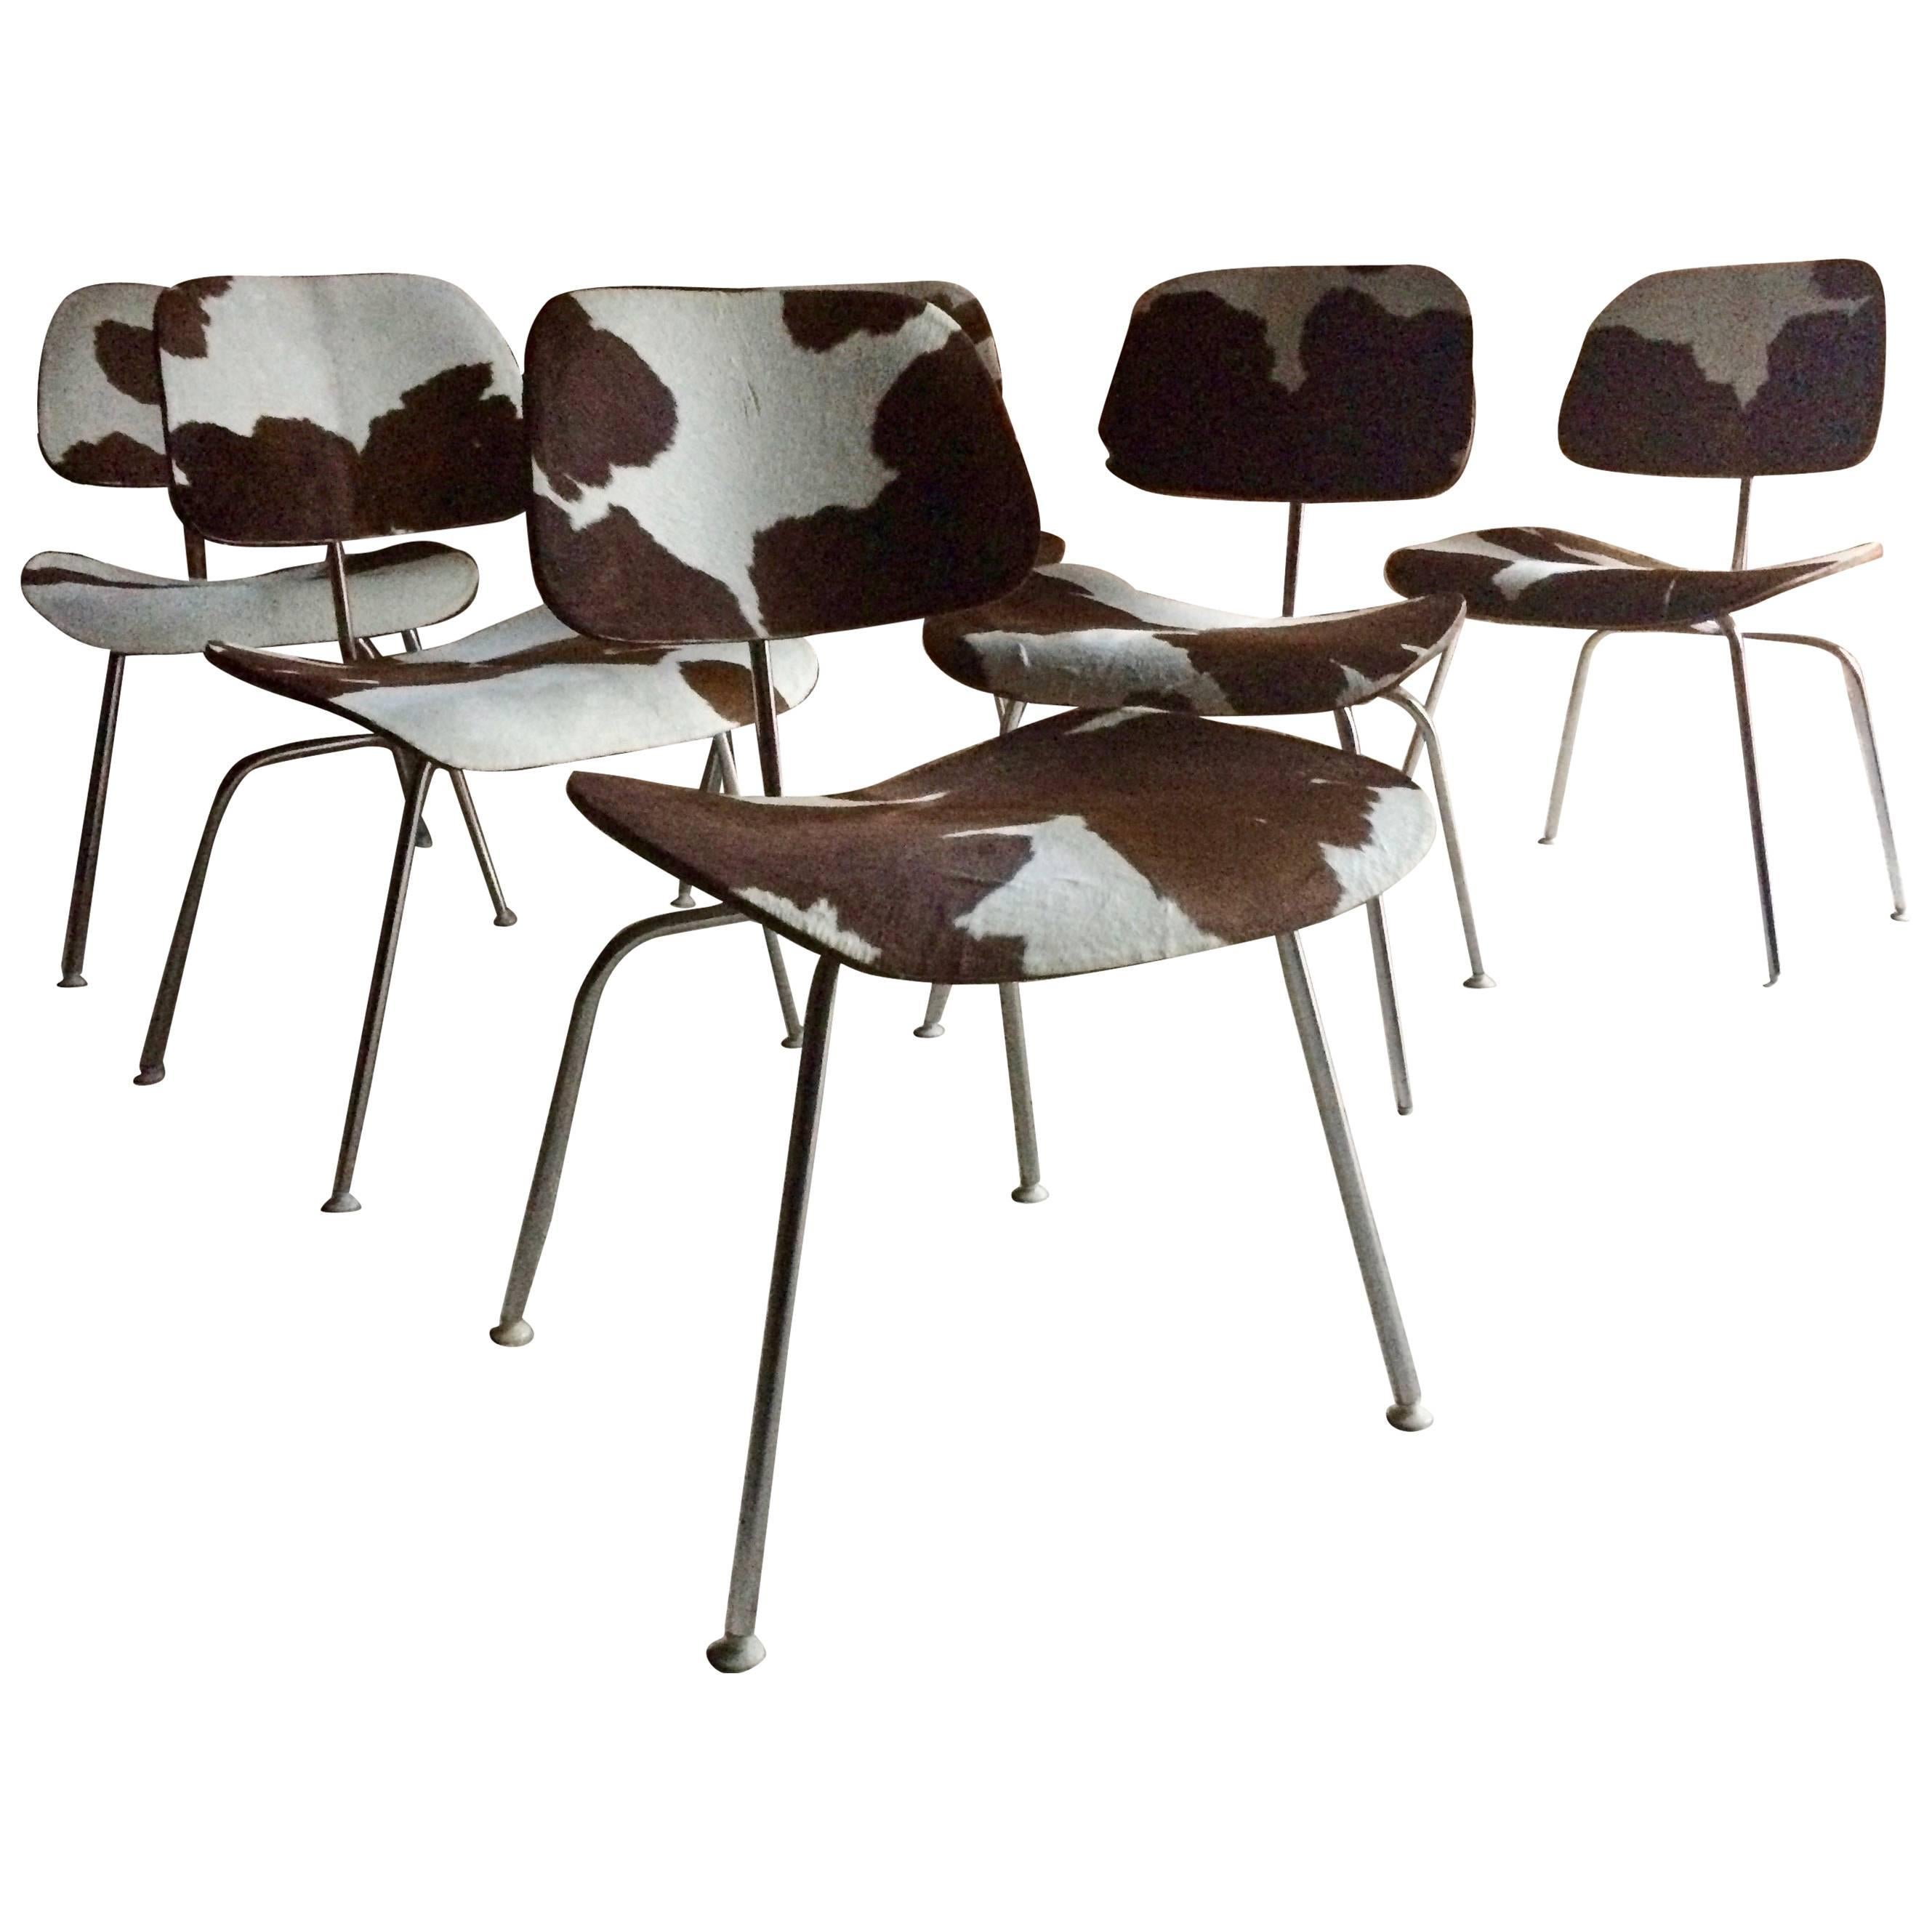 Charles and Ray Eames DCM Chairs Dining Six Calf Skin Herman Miller1960s